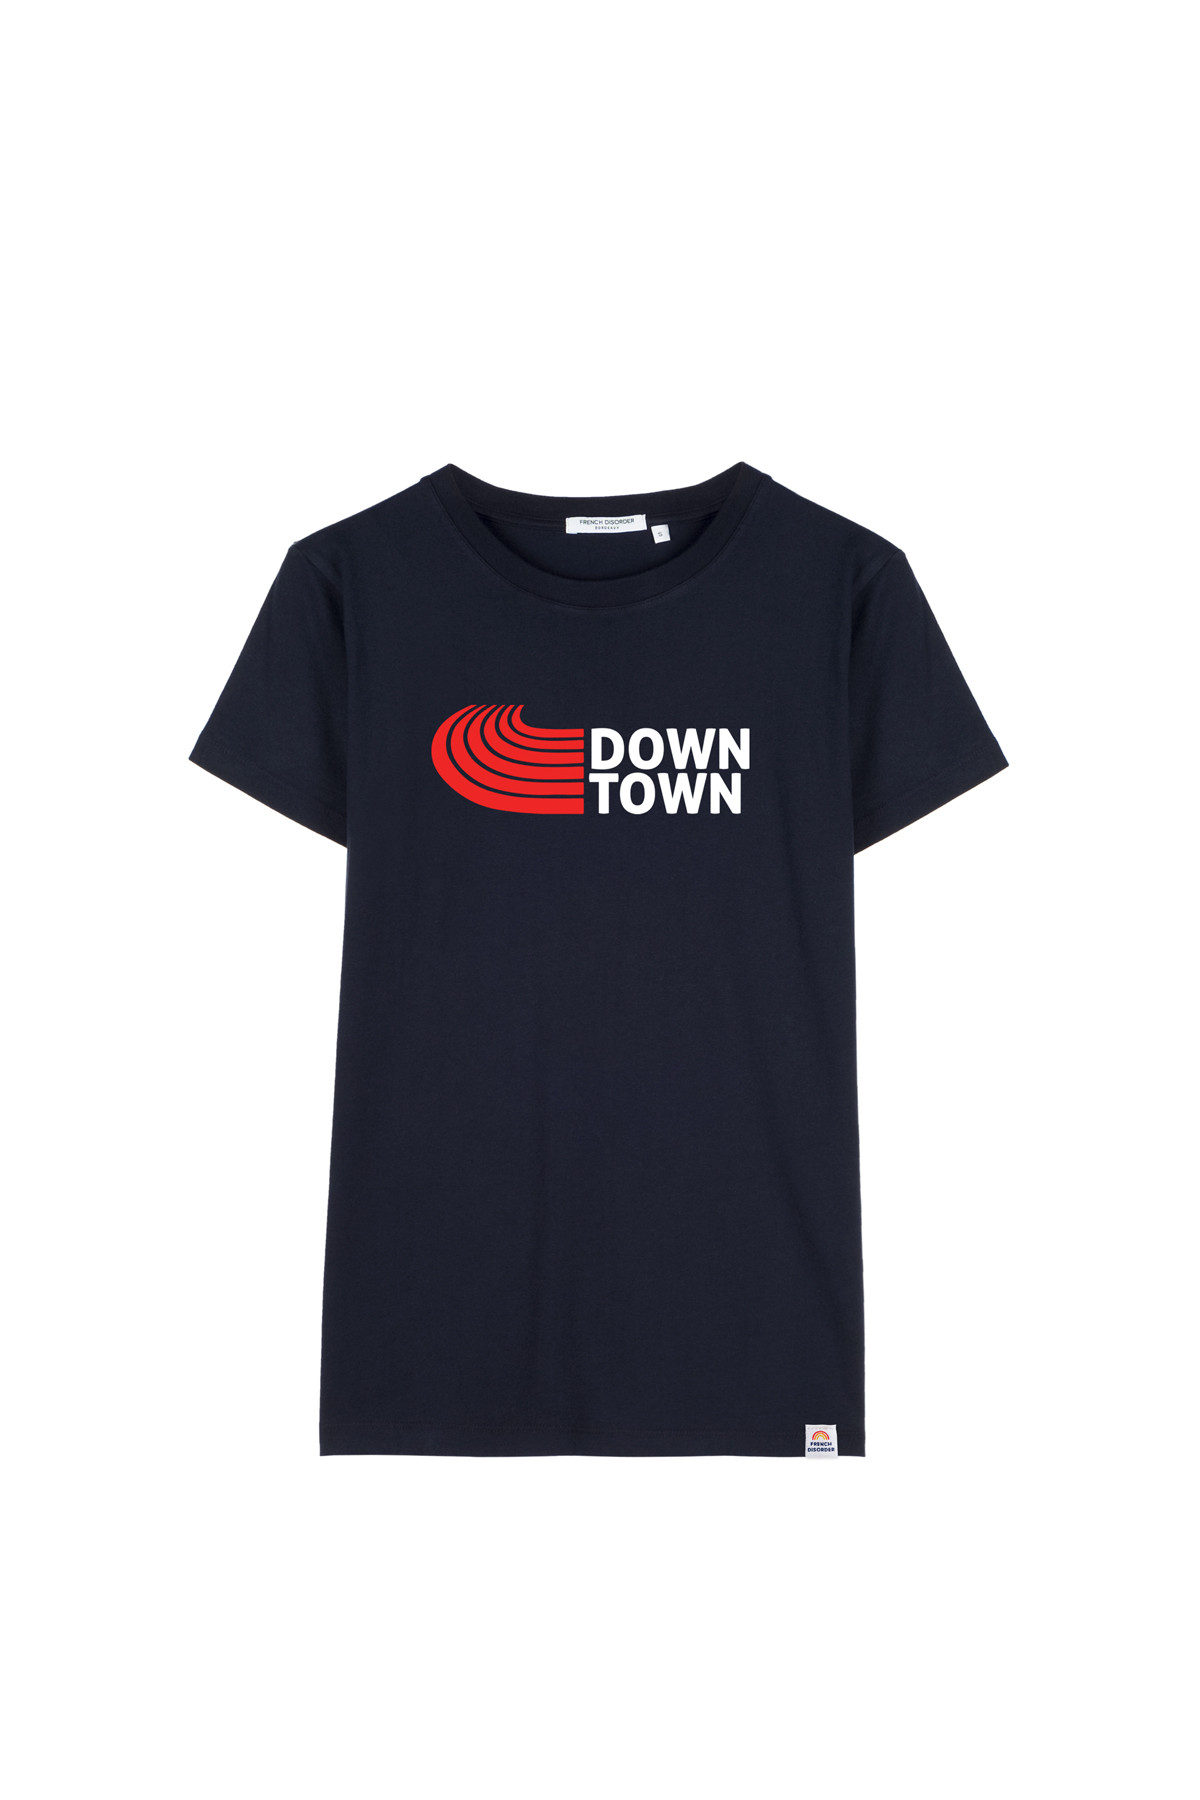 Tshirt DOWNTOWN French Disorder